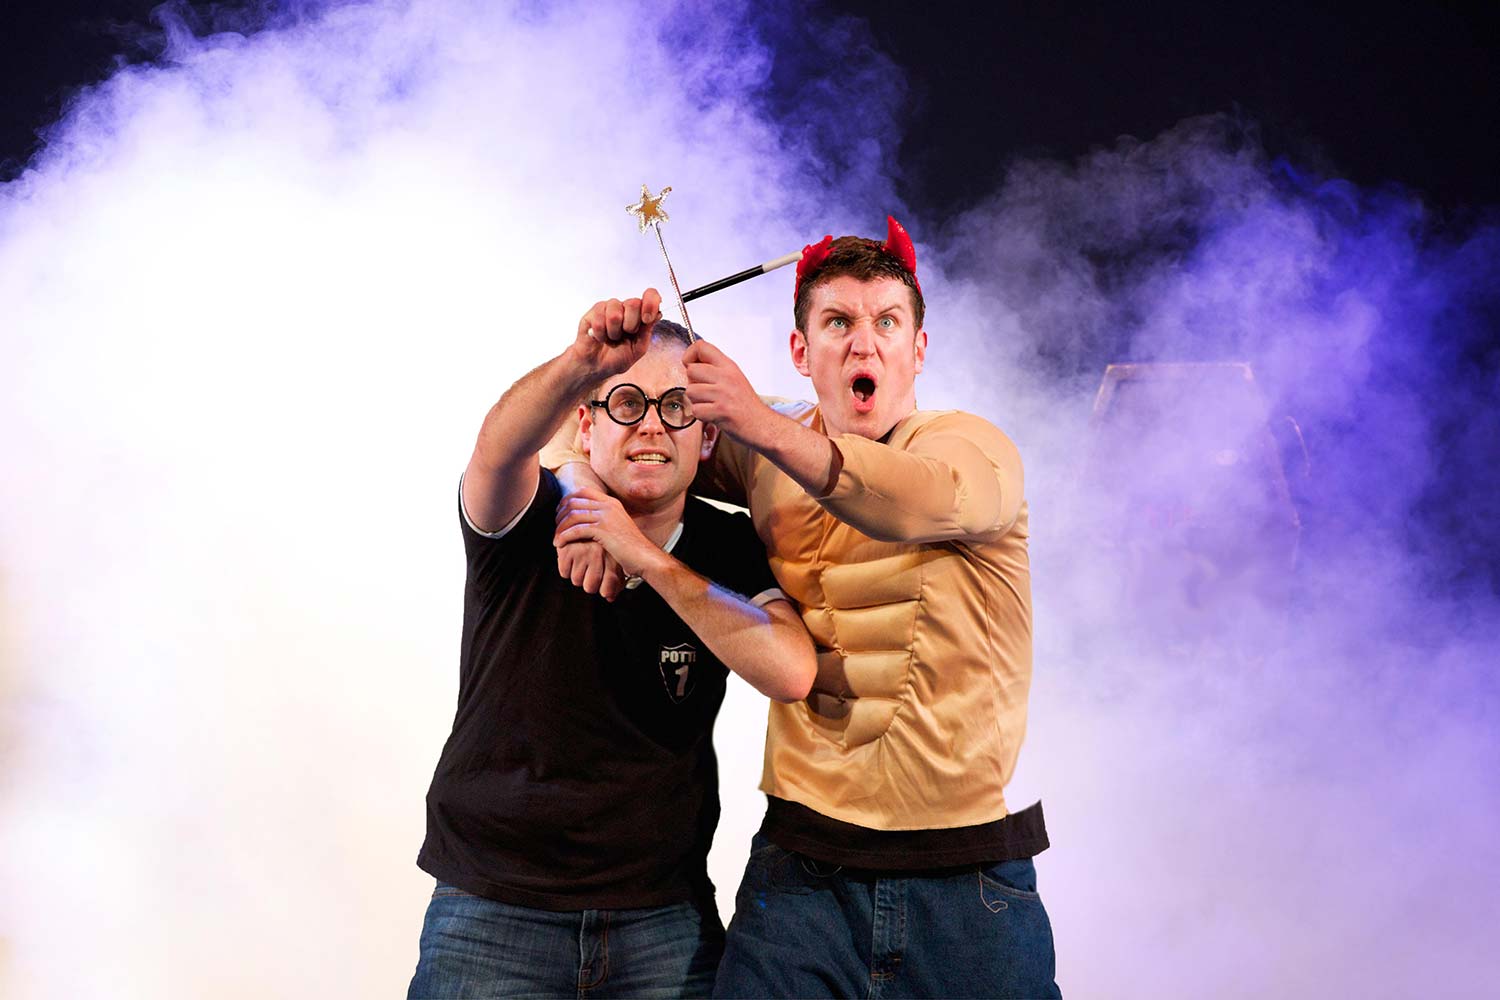 Potted potter review